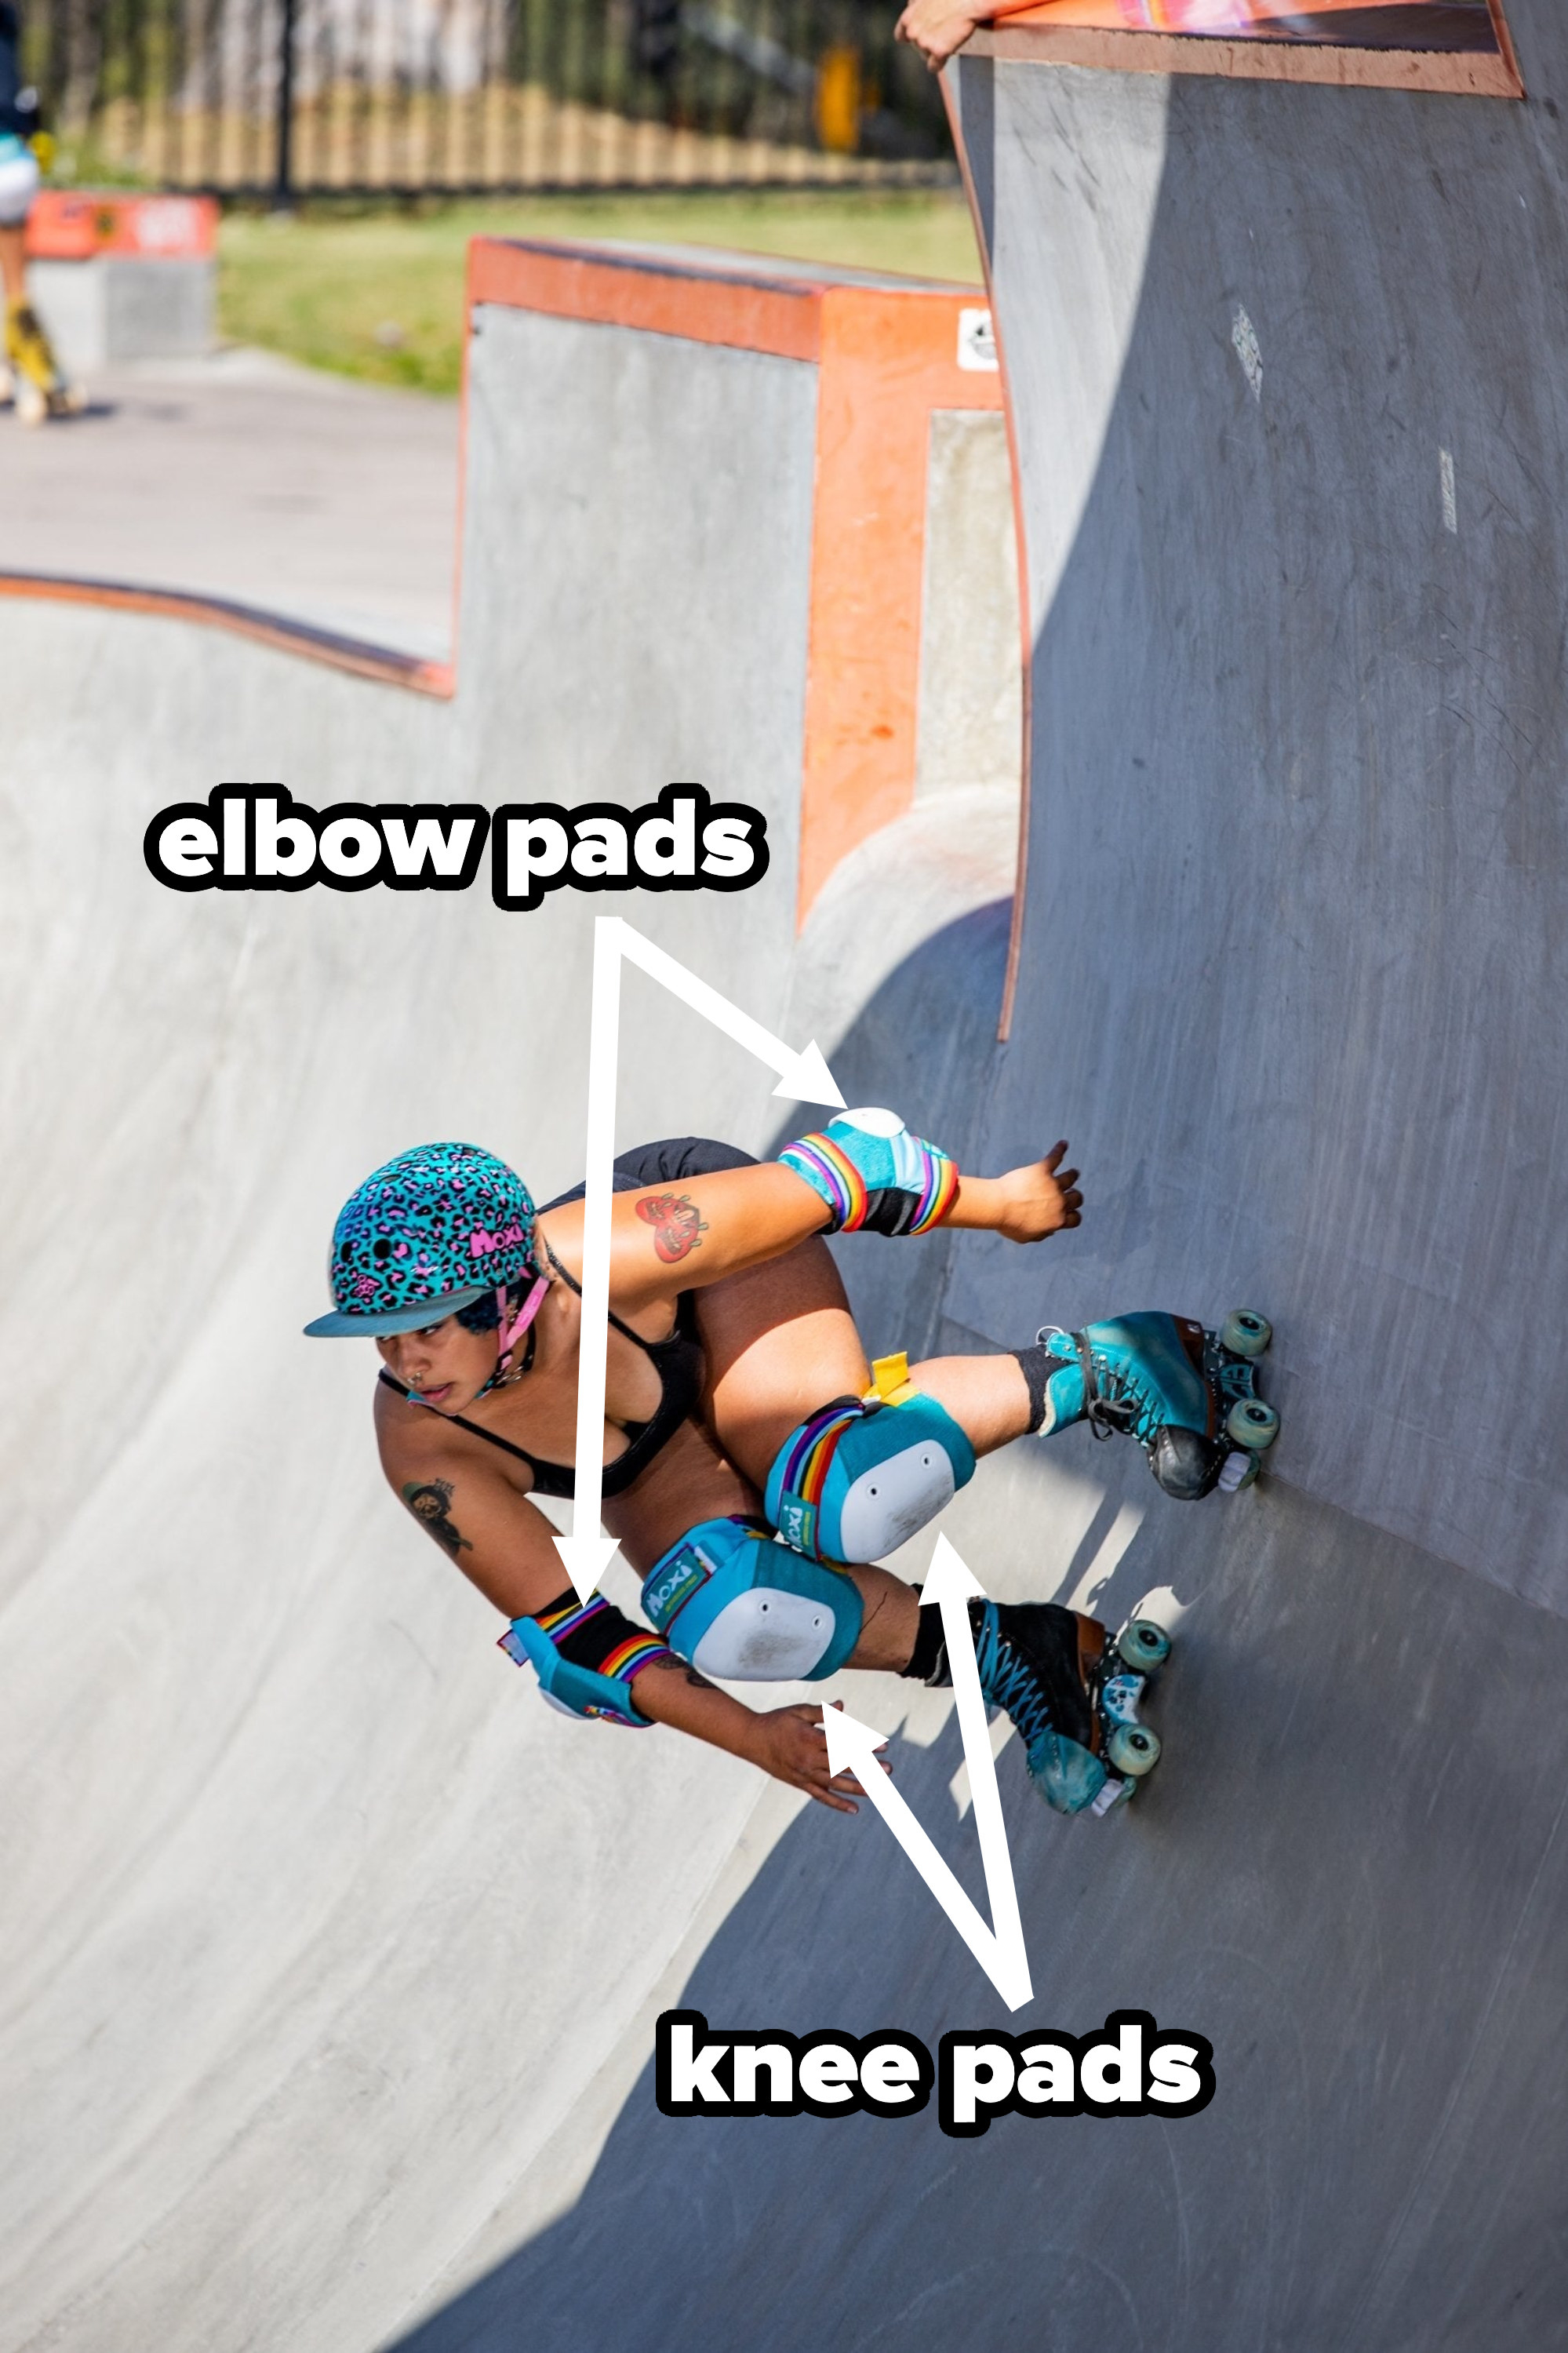 A model roller skater wearing elbow and knee pads on a ramp at a skate park